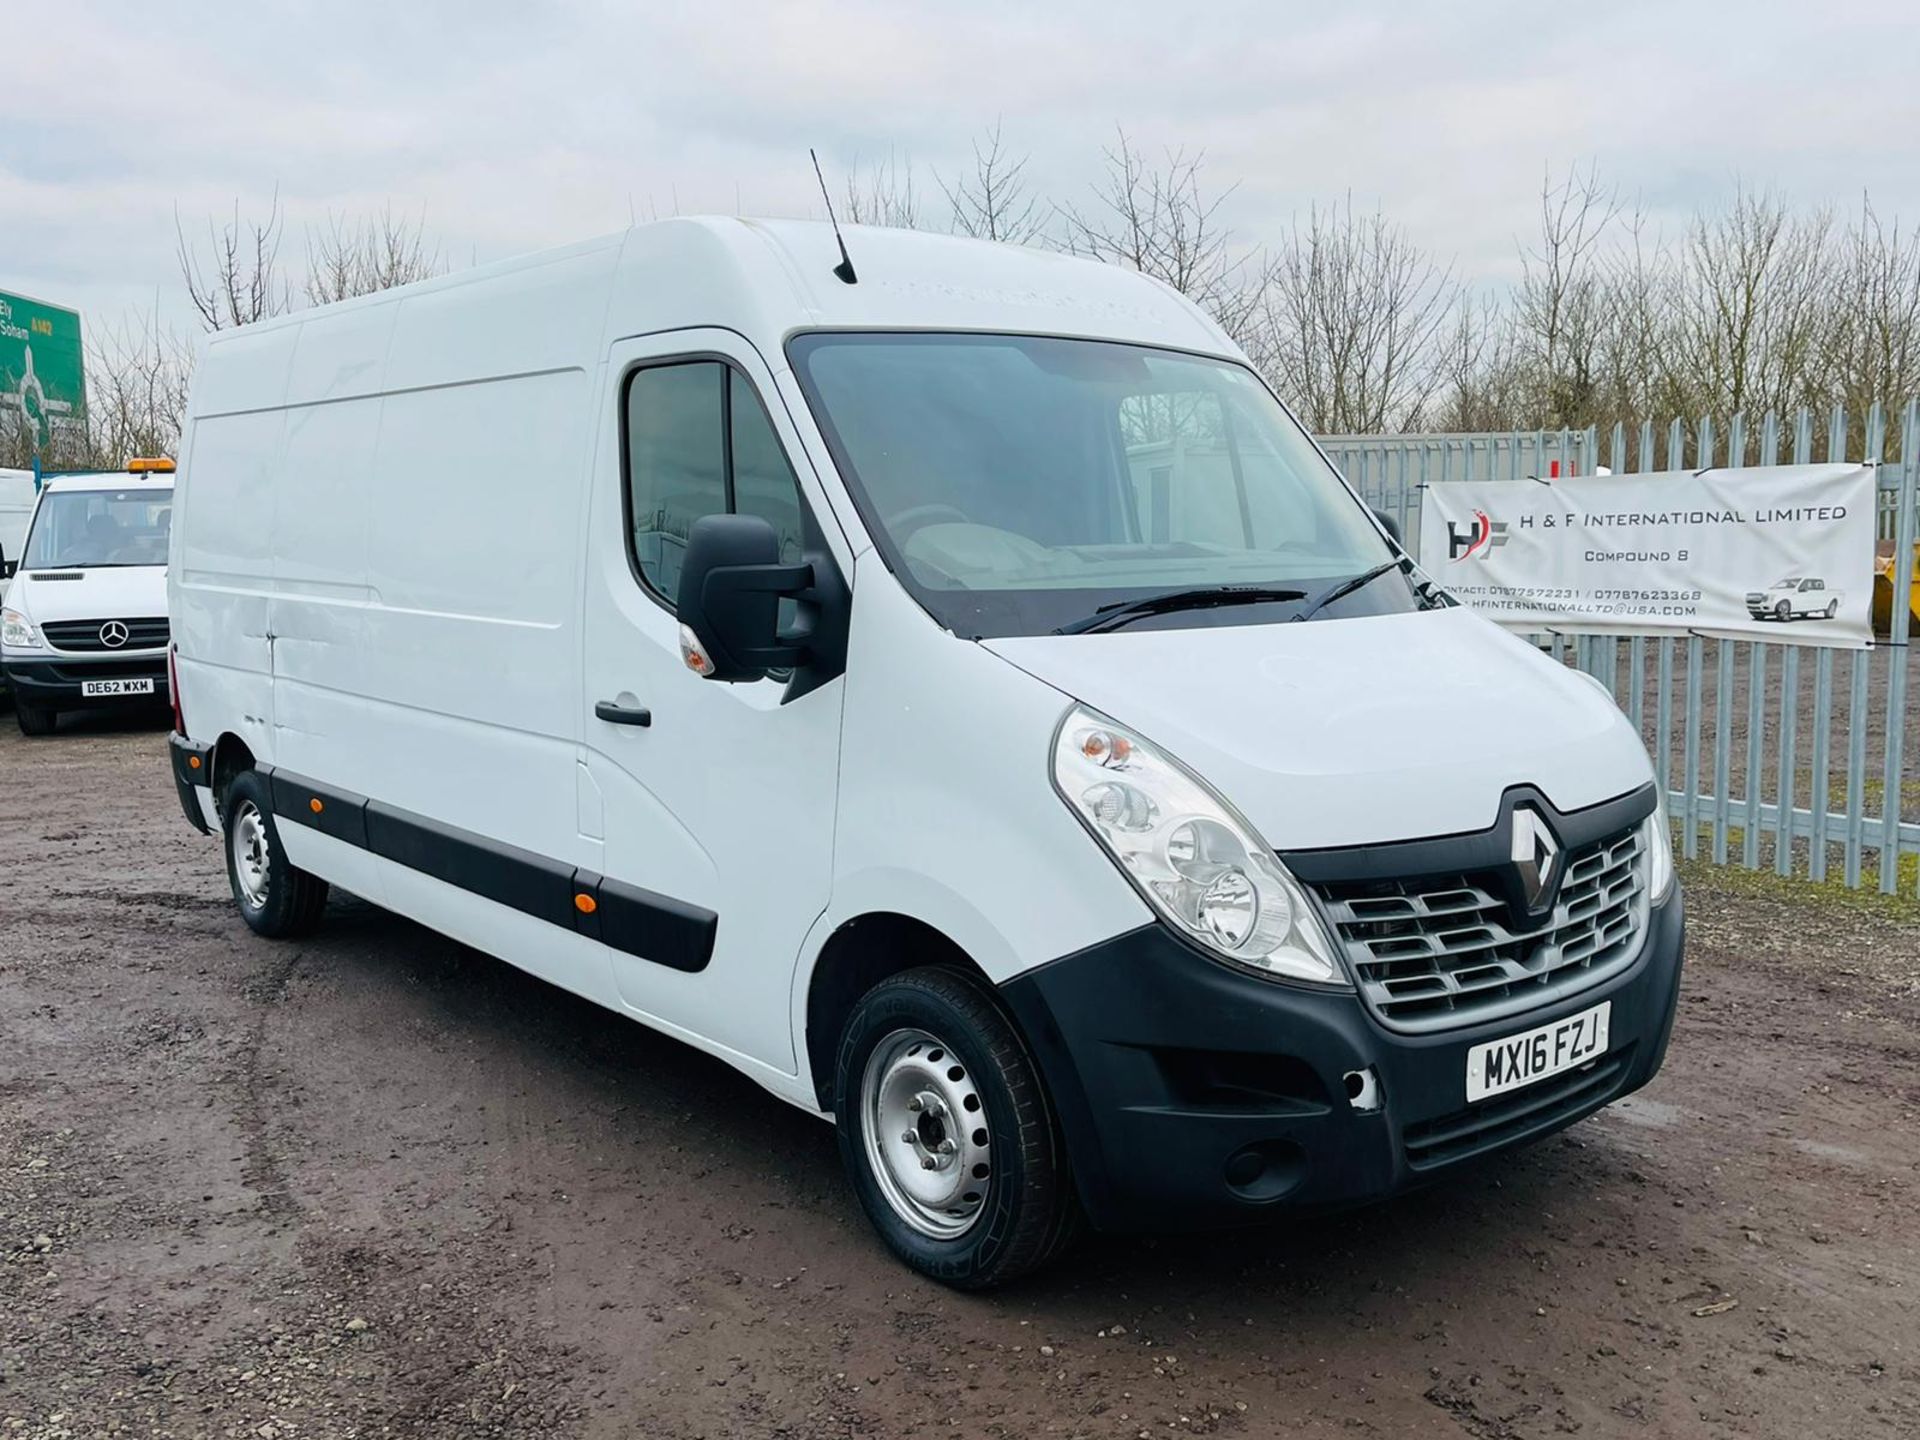 Renault Master 2.3 DCI 110 Business LM35 L3 H2 2016 '16 reg' Fridge/Freezer - Fully Insulated - Image 2 of 23